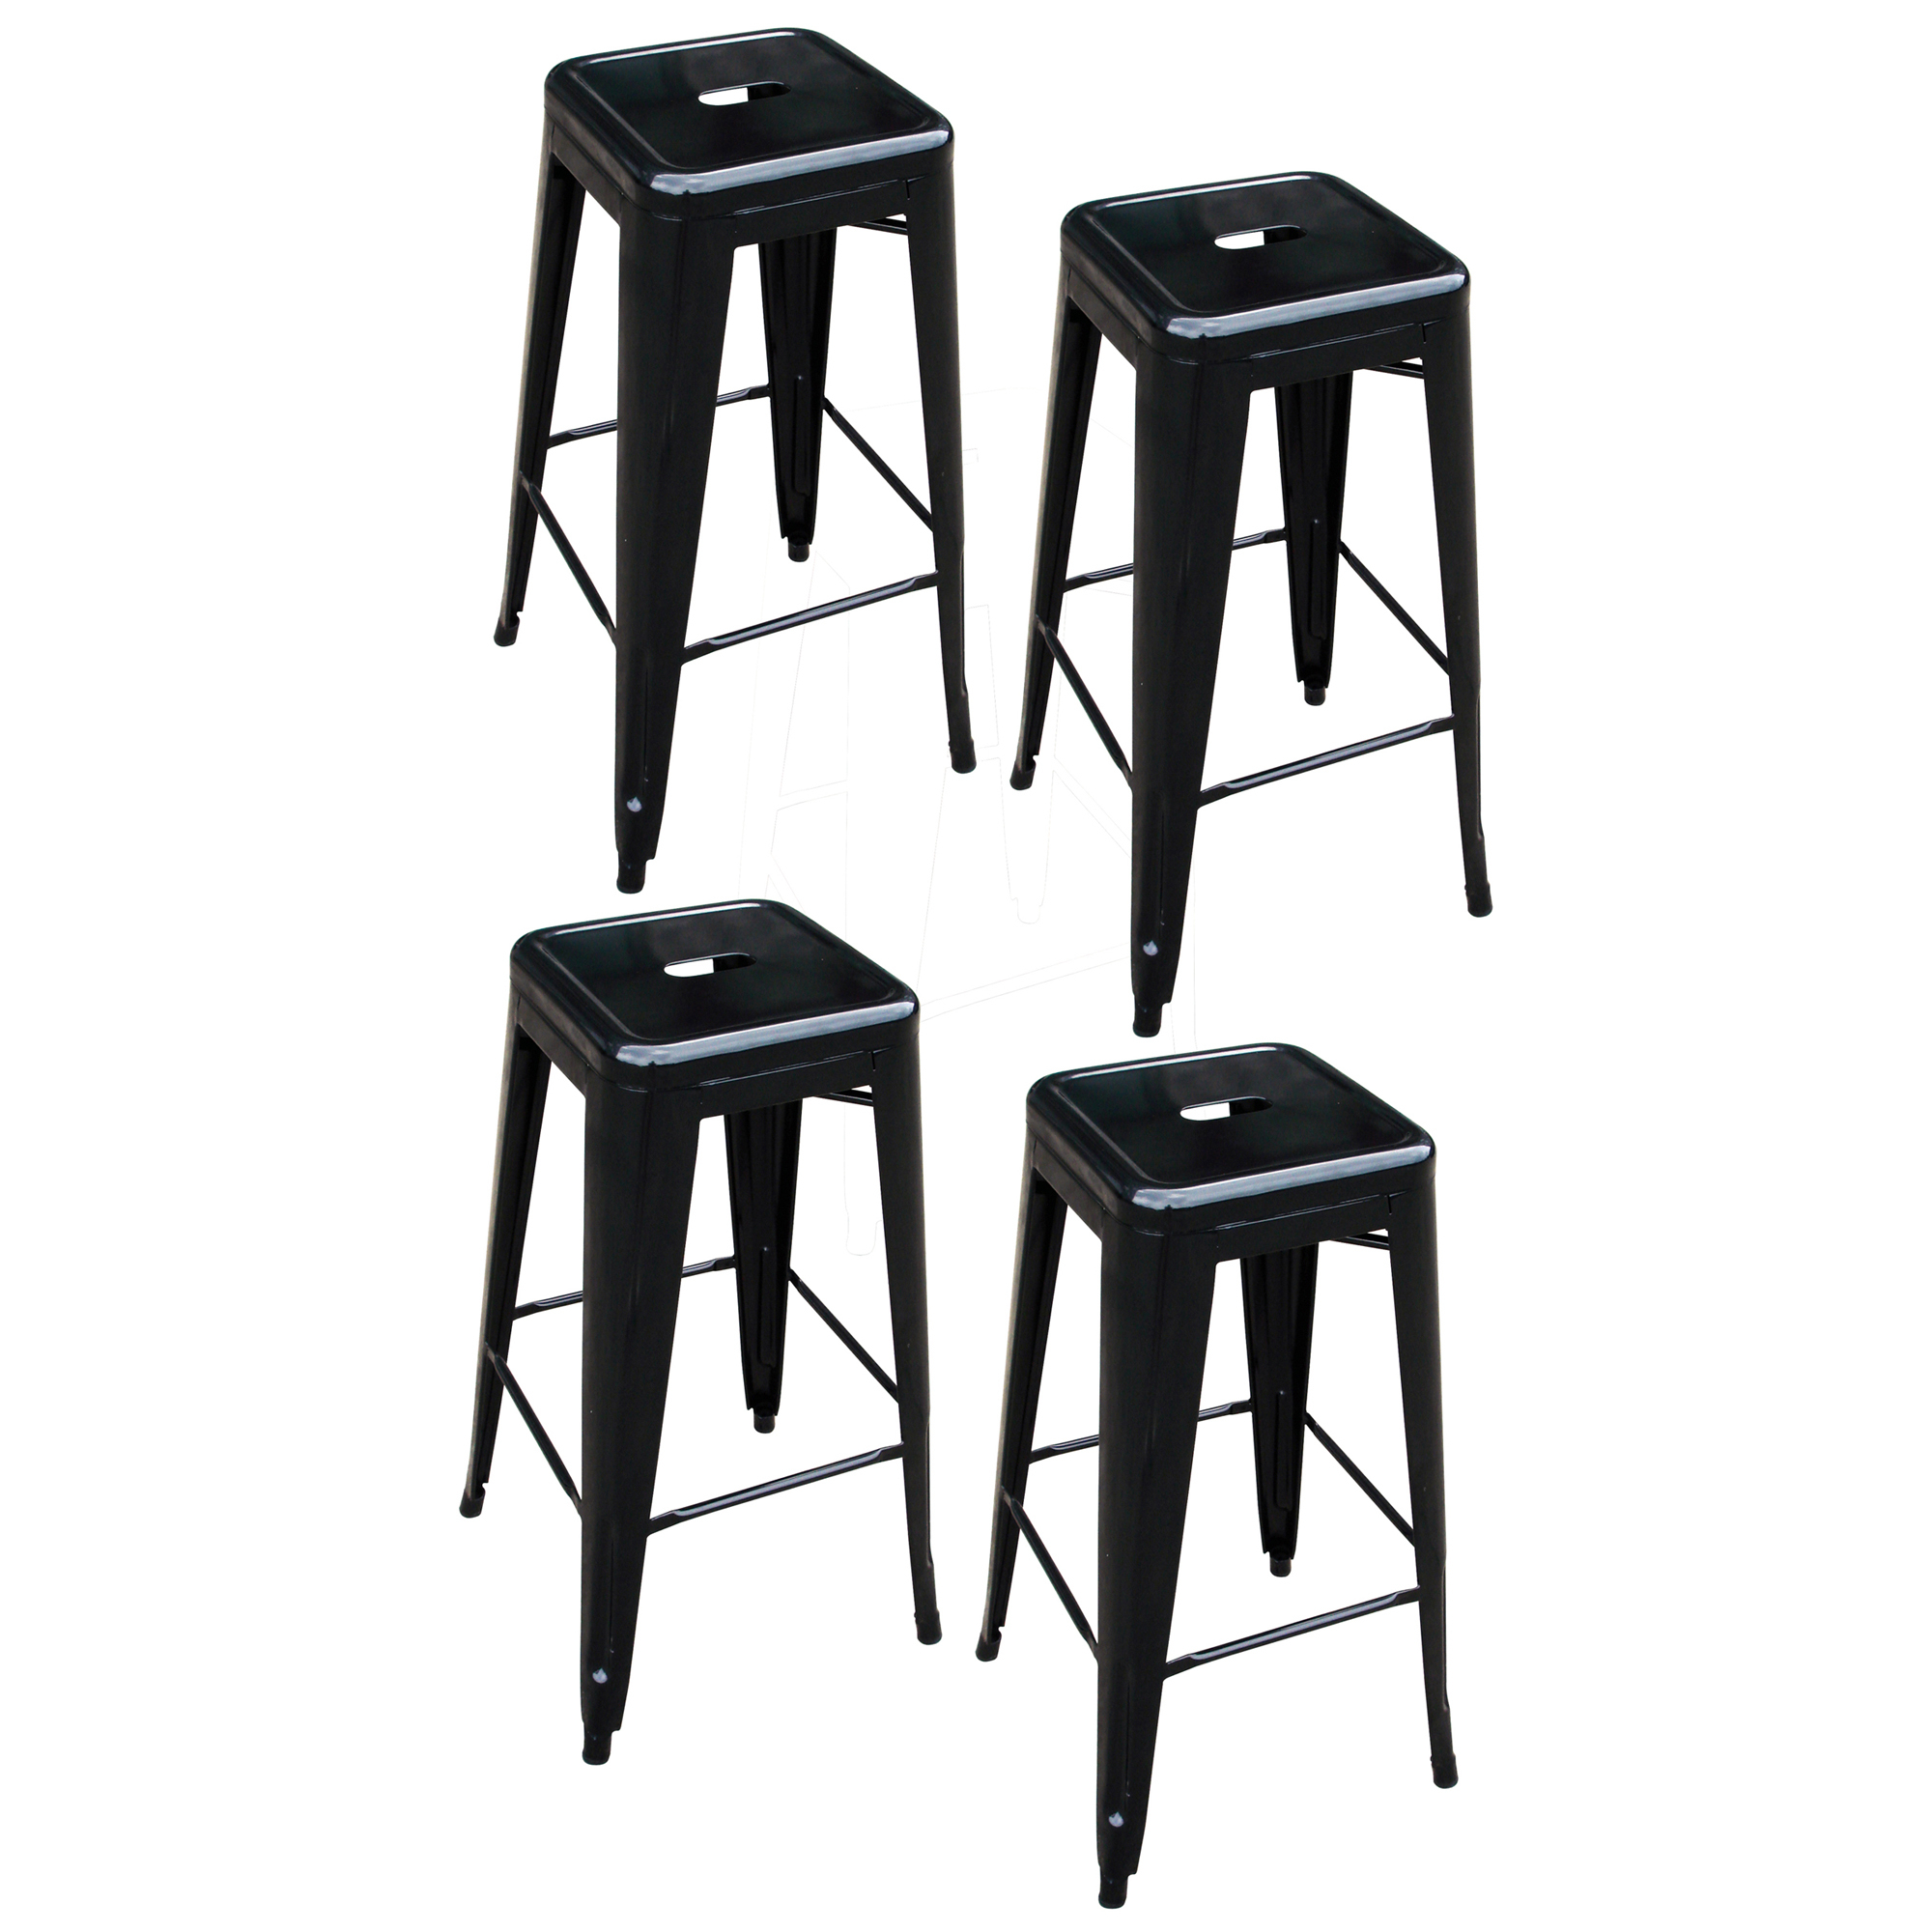 BTEXPERT® Four of 30-inch Tabouret Metal Counter Bar Stools - Modern Bright Glossy Black Style Stackable Studio Stool (Set of 4)